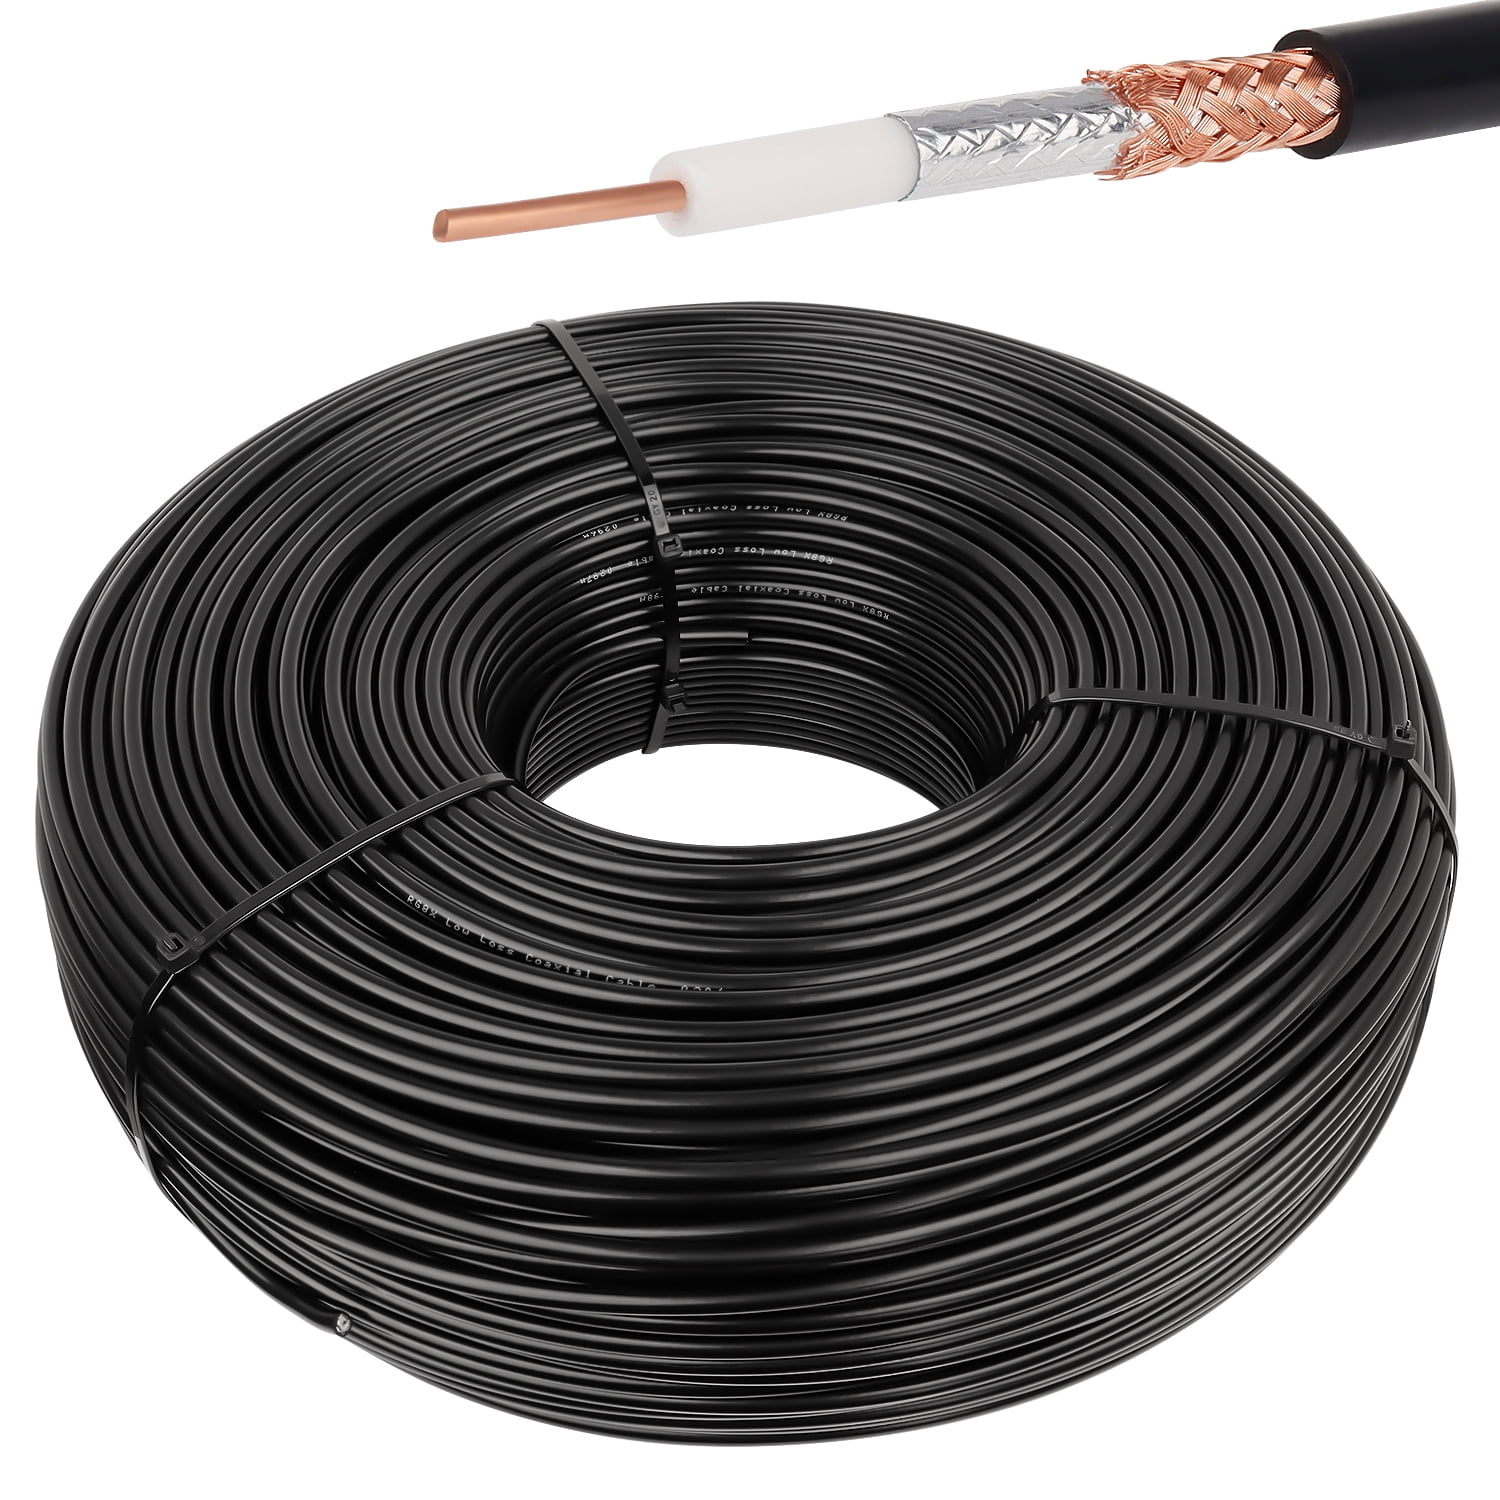 RG8X Extension Cable 100ft, MOOKEERF Ohm Antenna & RG8X 50 4G Cable Loss Coaxial Cable Wireless Pigtail for Wired Network Router Cable Low Impedance Coax RF Flexible Black